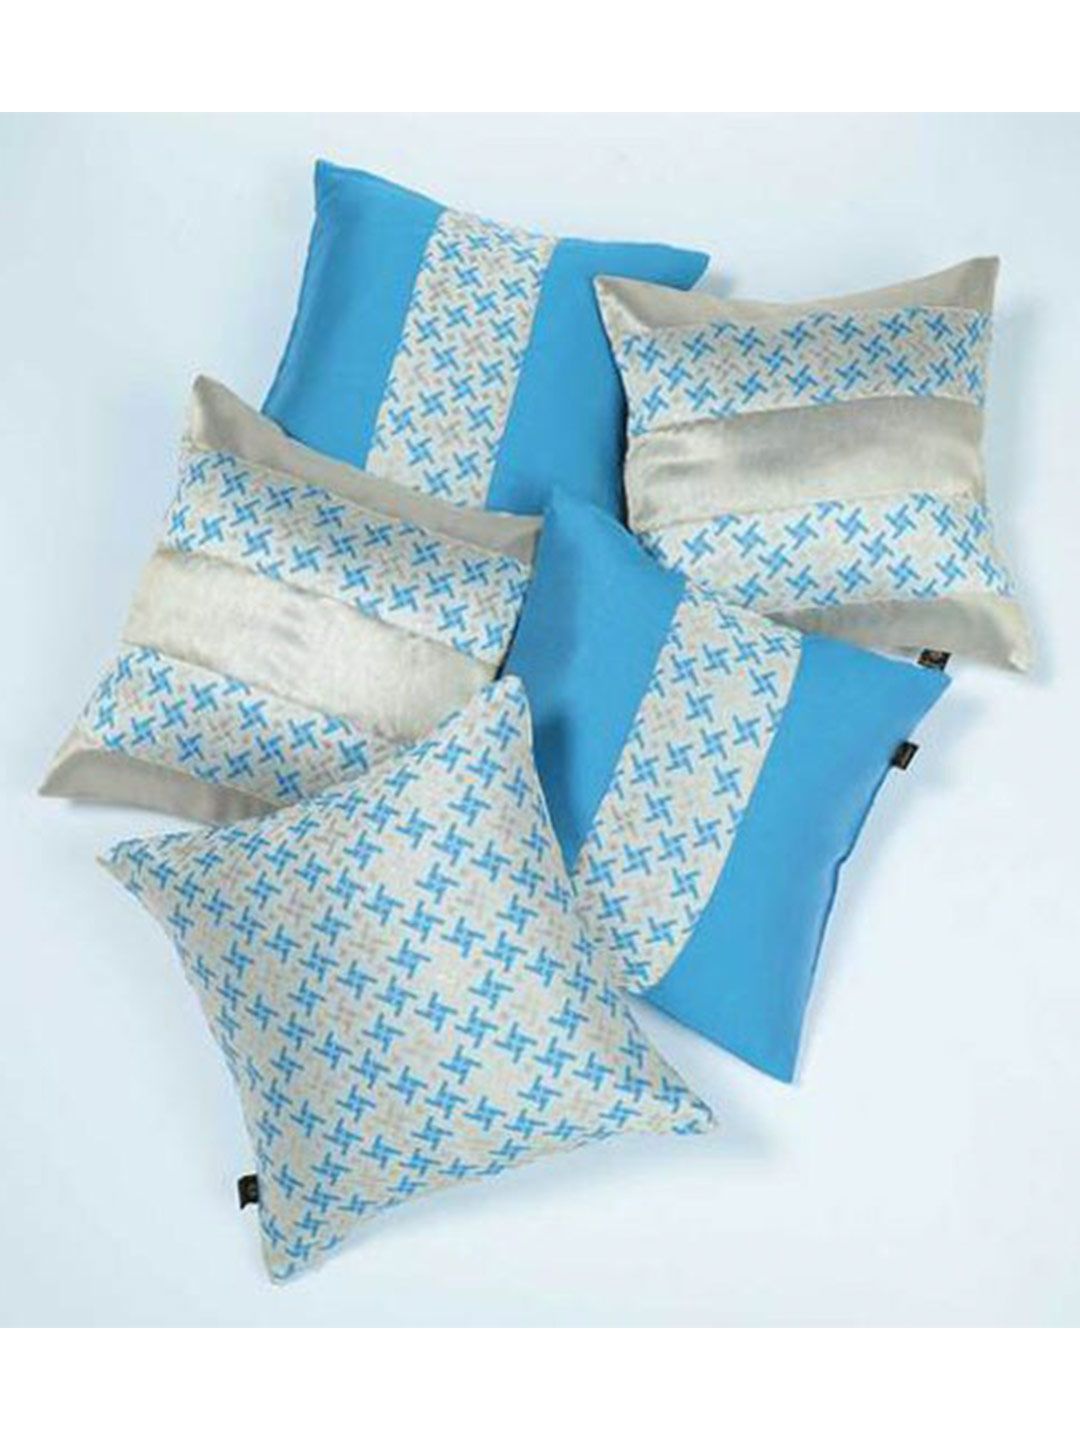 Lushomes Set Of 5 Geometric Design Square Cushion Covers Price in India